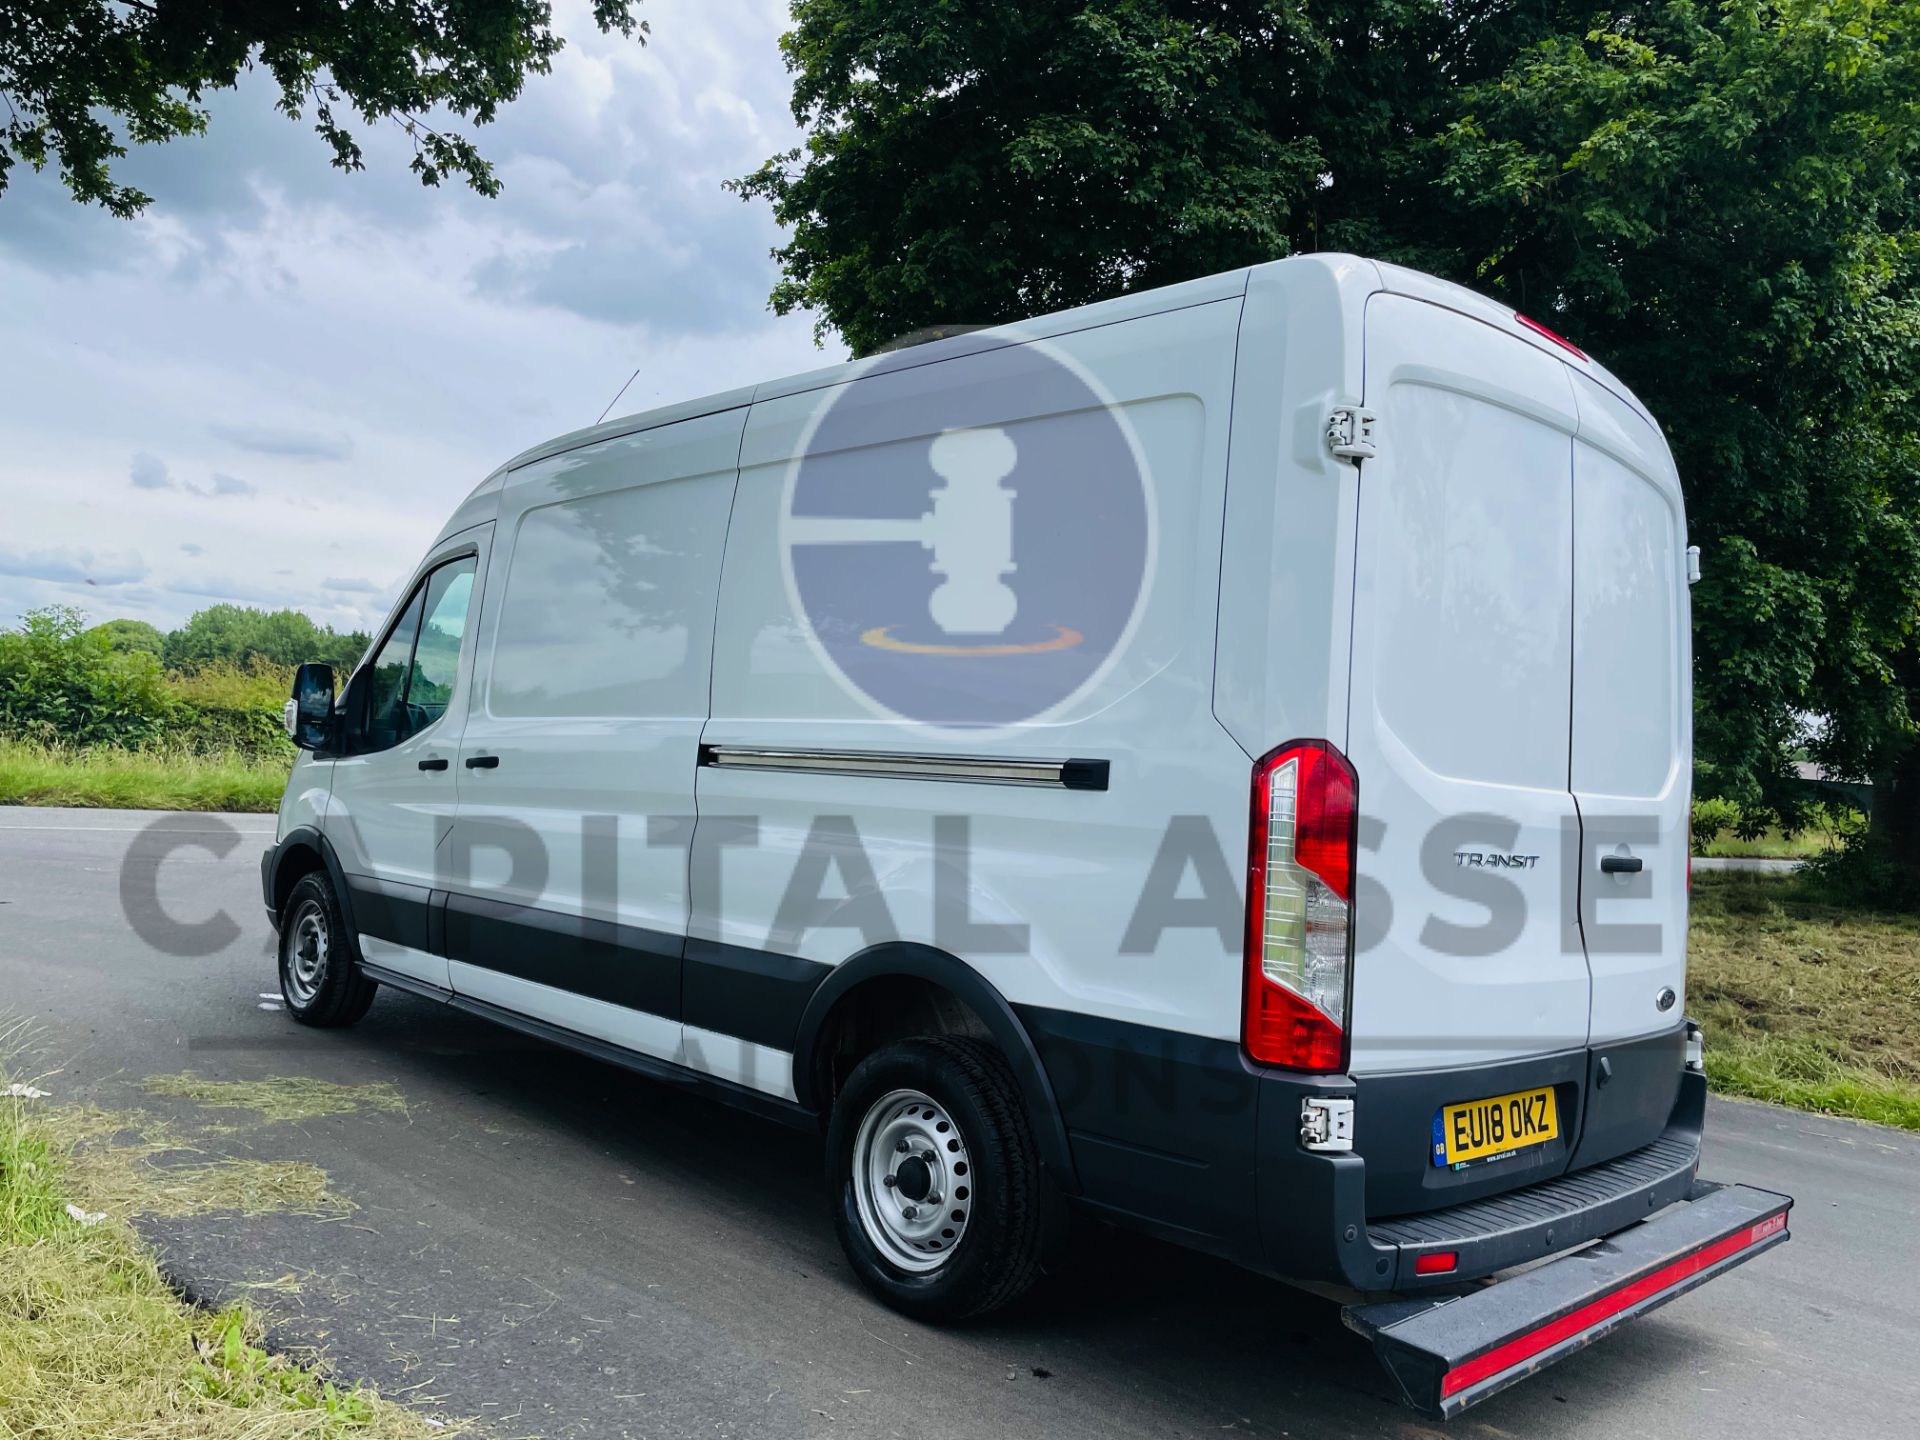 (On Sale) FORD TRANSIT *PANEL VAN* (2018 - EURO 6) 2.0 TDCI 'ECOBLUE' (1 OWNER) *AIR CON & NAV* - Image 10 of 43